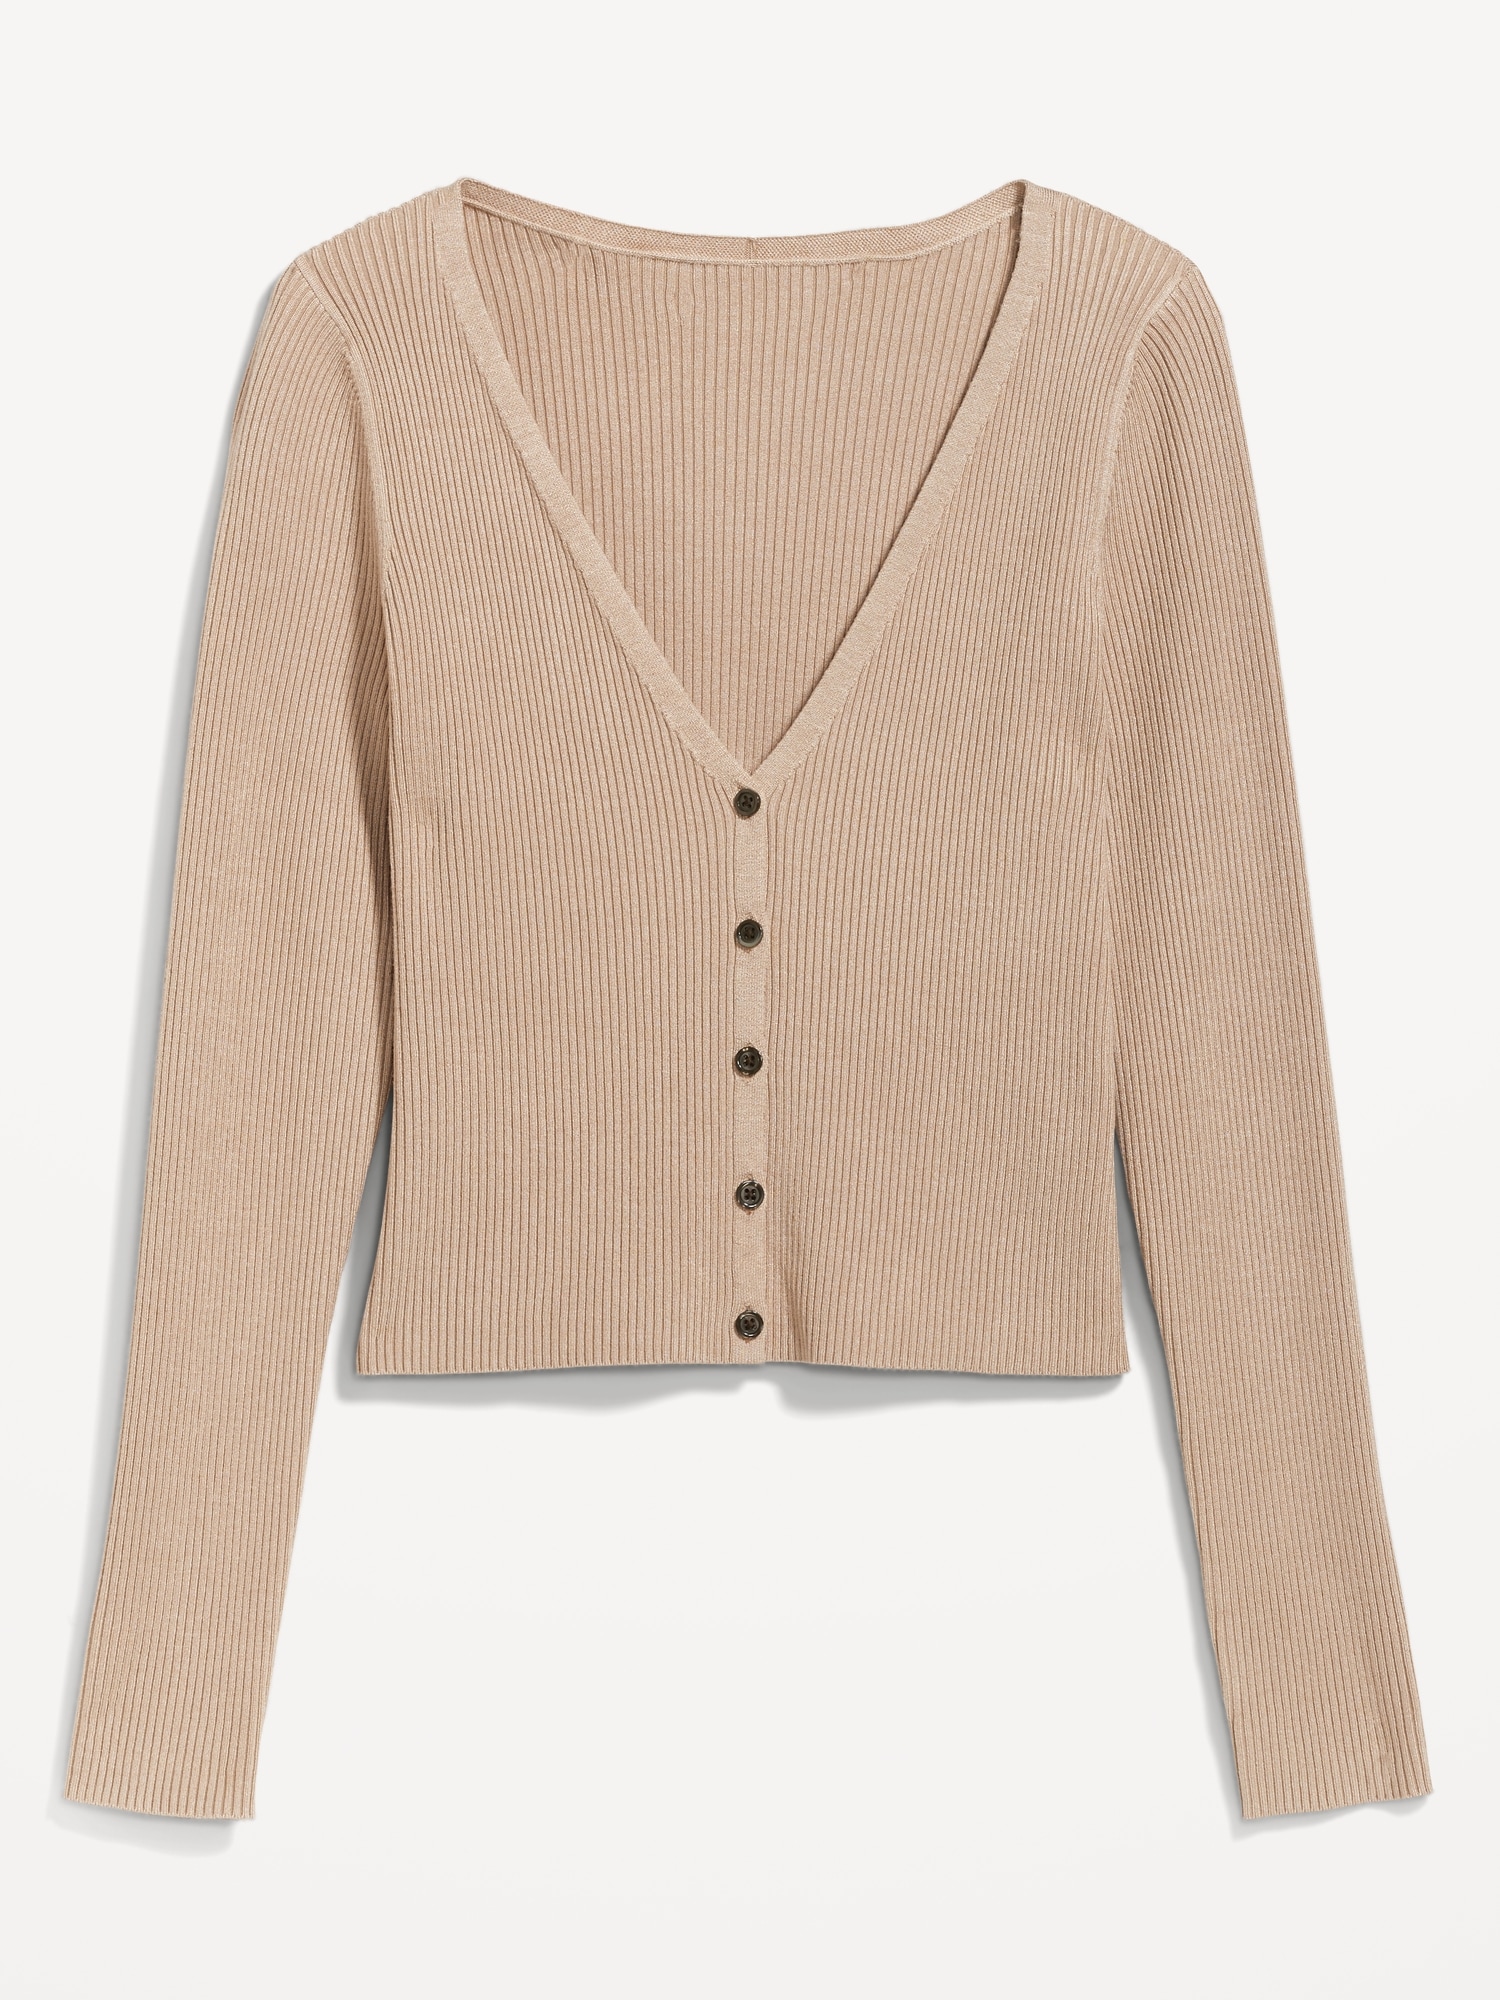 V-Neck Rib-Knit Cropped Cardigan Sweater for Women